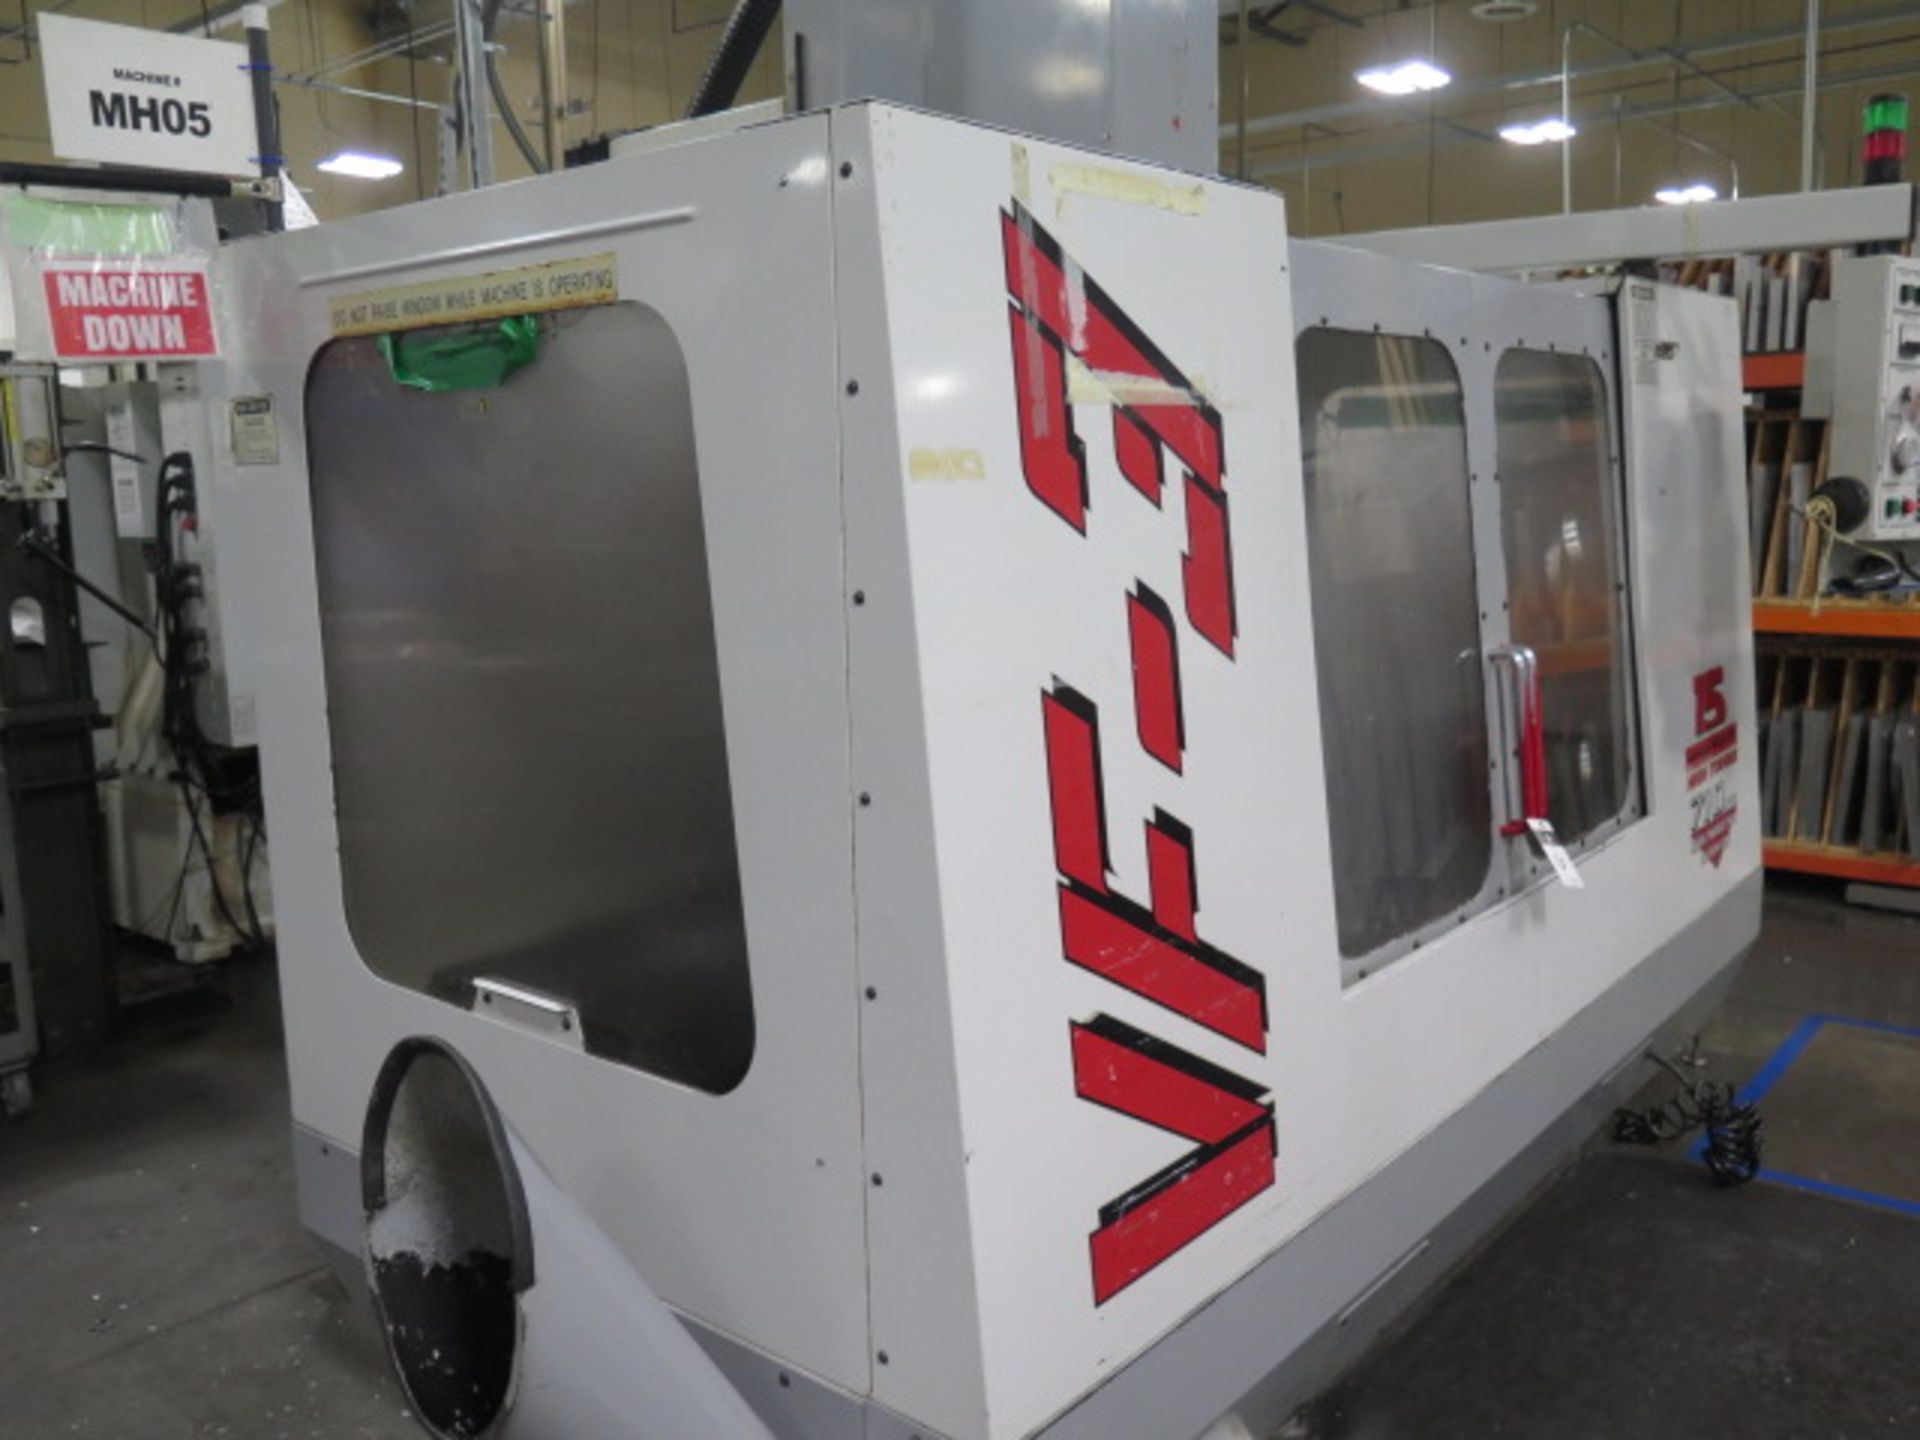 1997 Haas VF-3 4-Axis CNC Vertical Machining Center s/n 10187 w/ Haas Controls, 20-Station ATC, BT- - Image 3 of 17